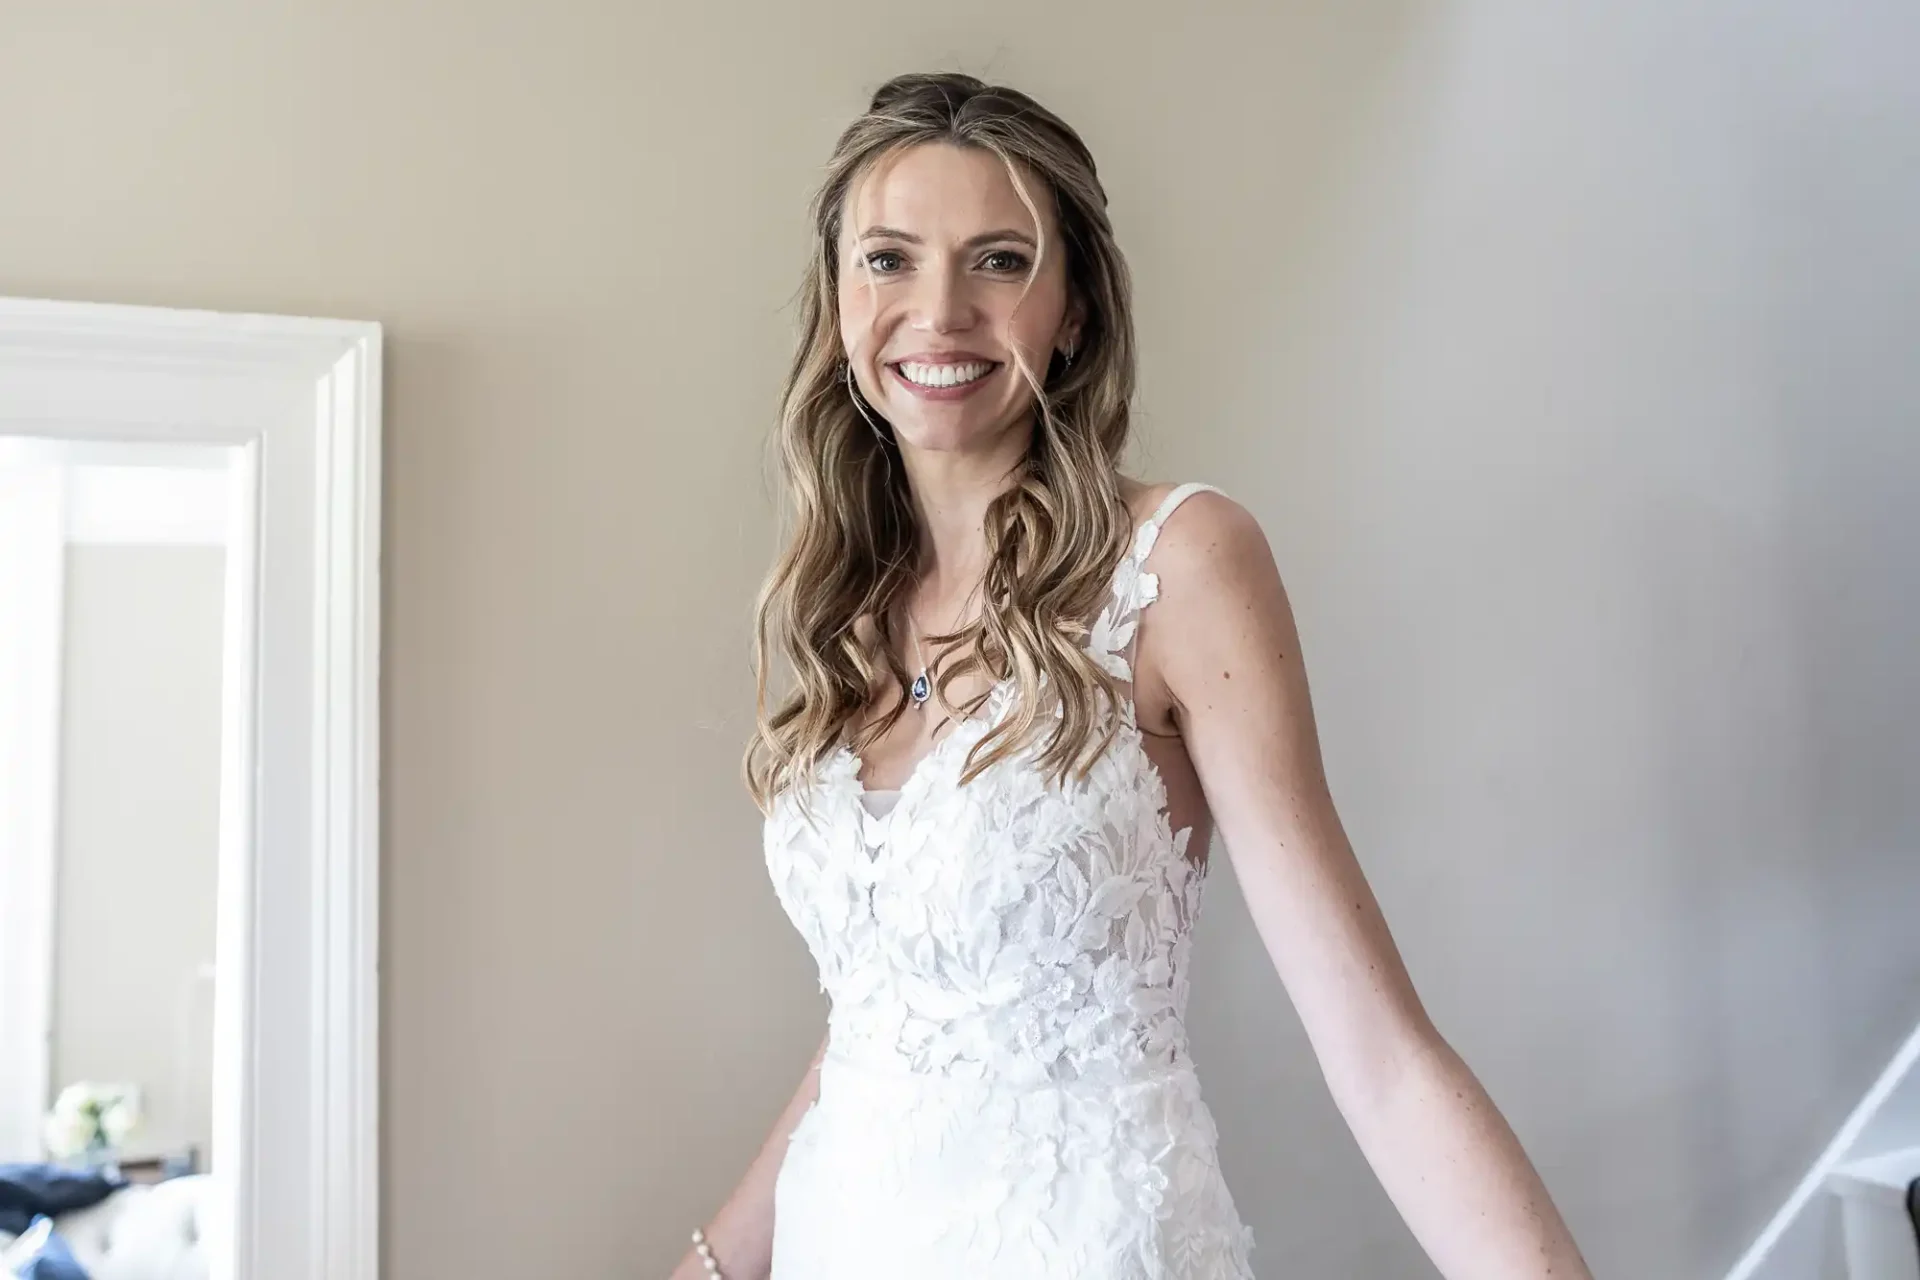 A woman in a white lace wedding dress stands indoors, smiling at the camera.